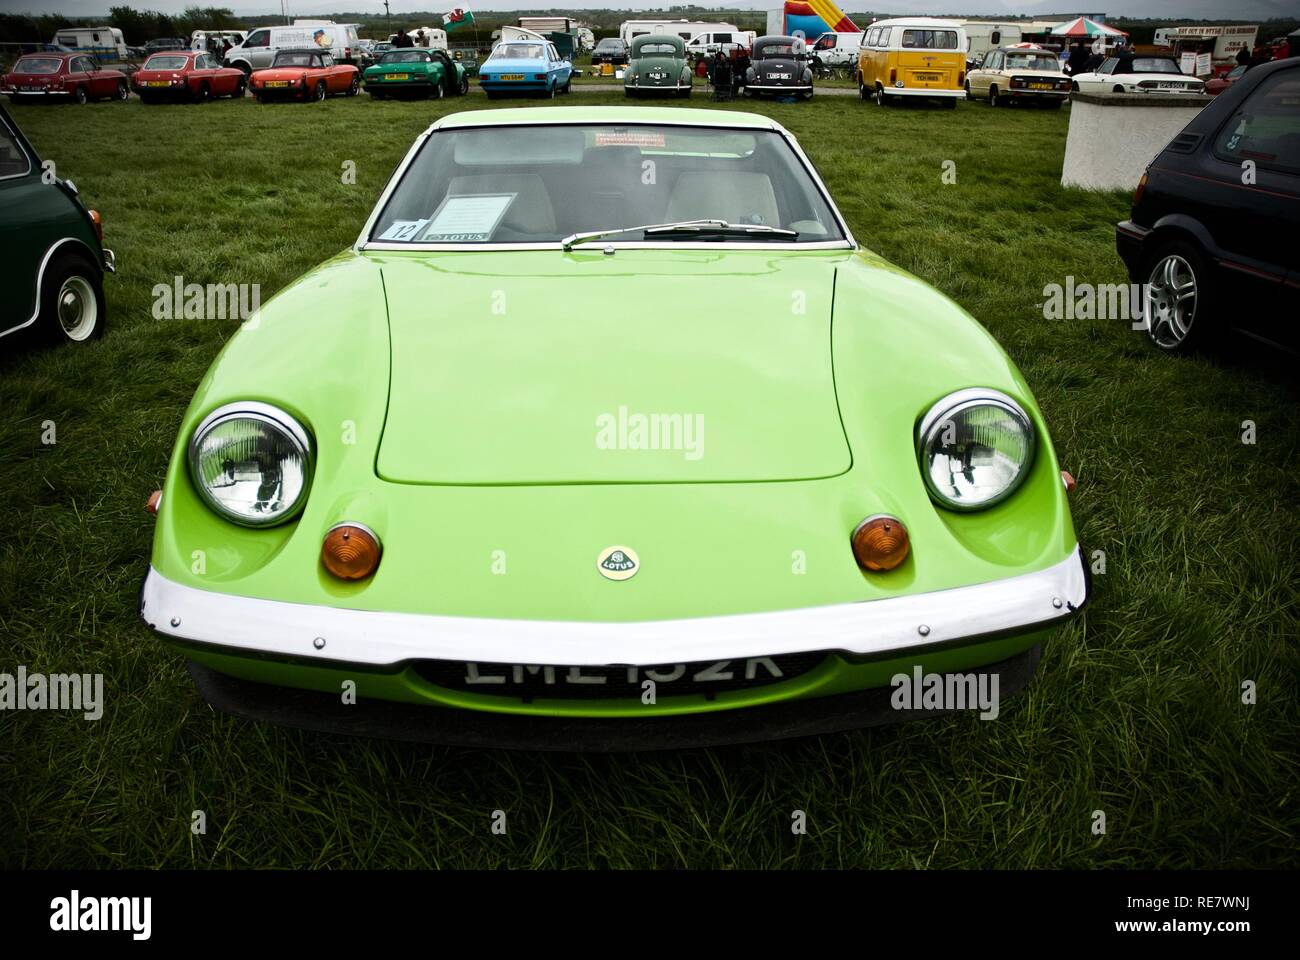 A Lotus Europa sports car at the Anglesey Vintage Rally, Anglesey, North Wales, UK, May 2015 Stock Photo